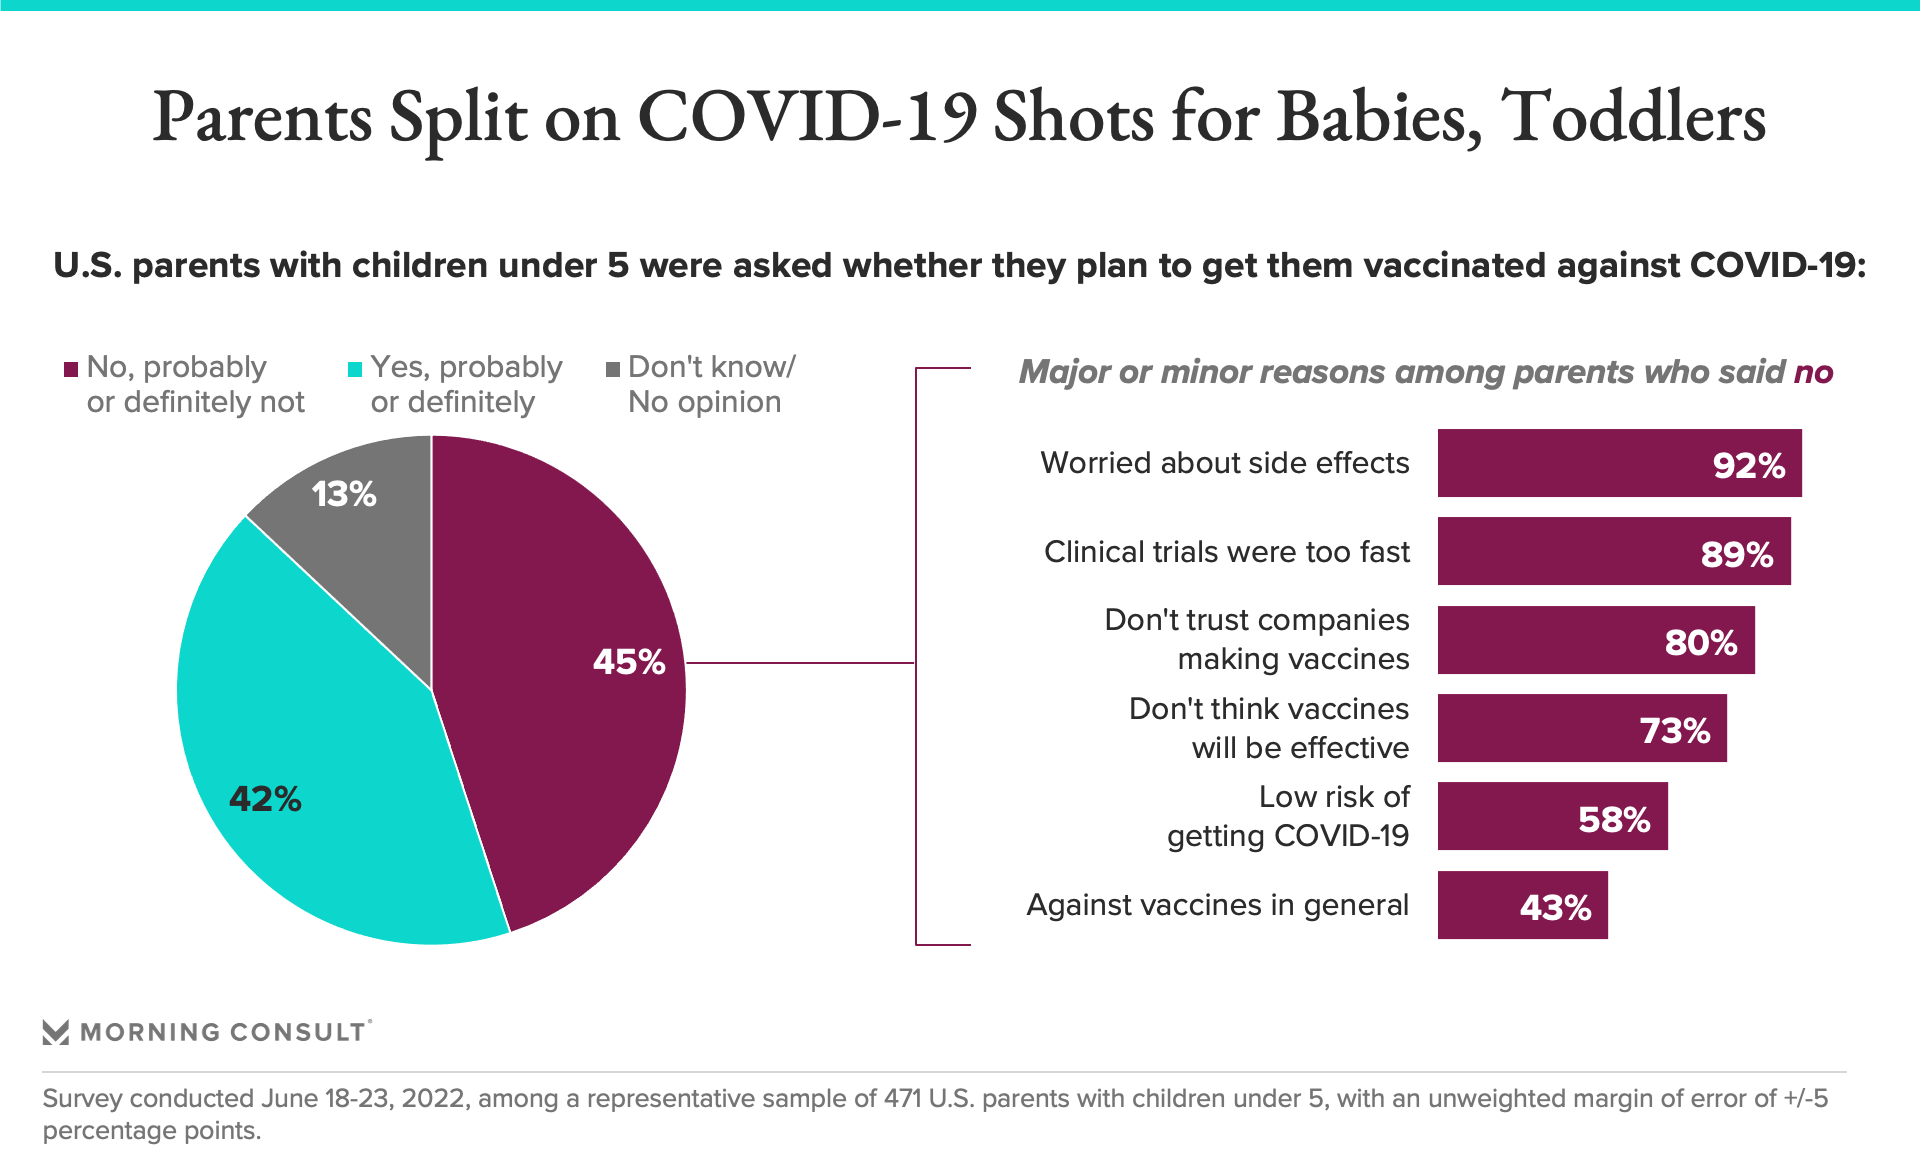 Graphic showing parents are split on COVID-19 shots for babies and toddlers